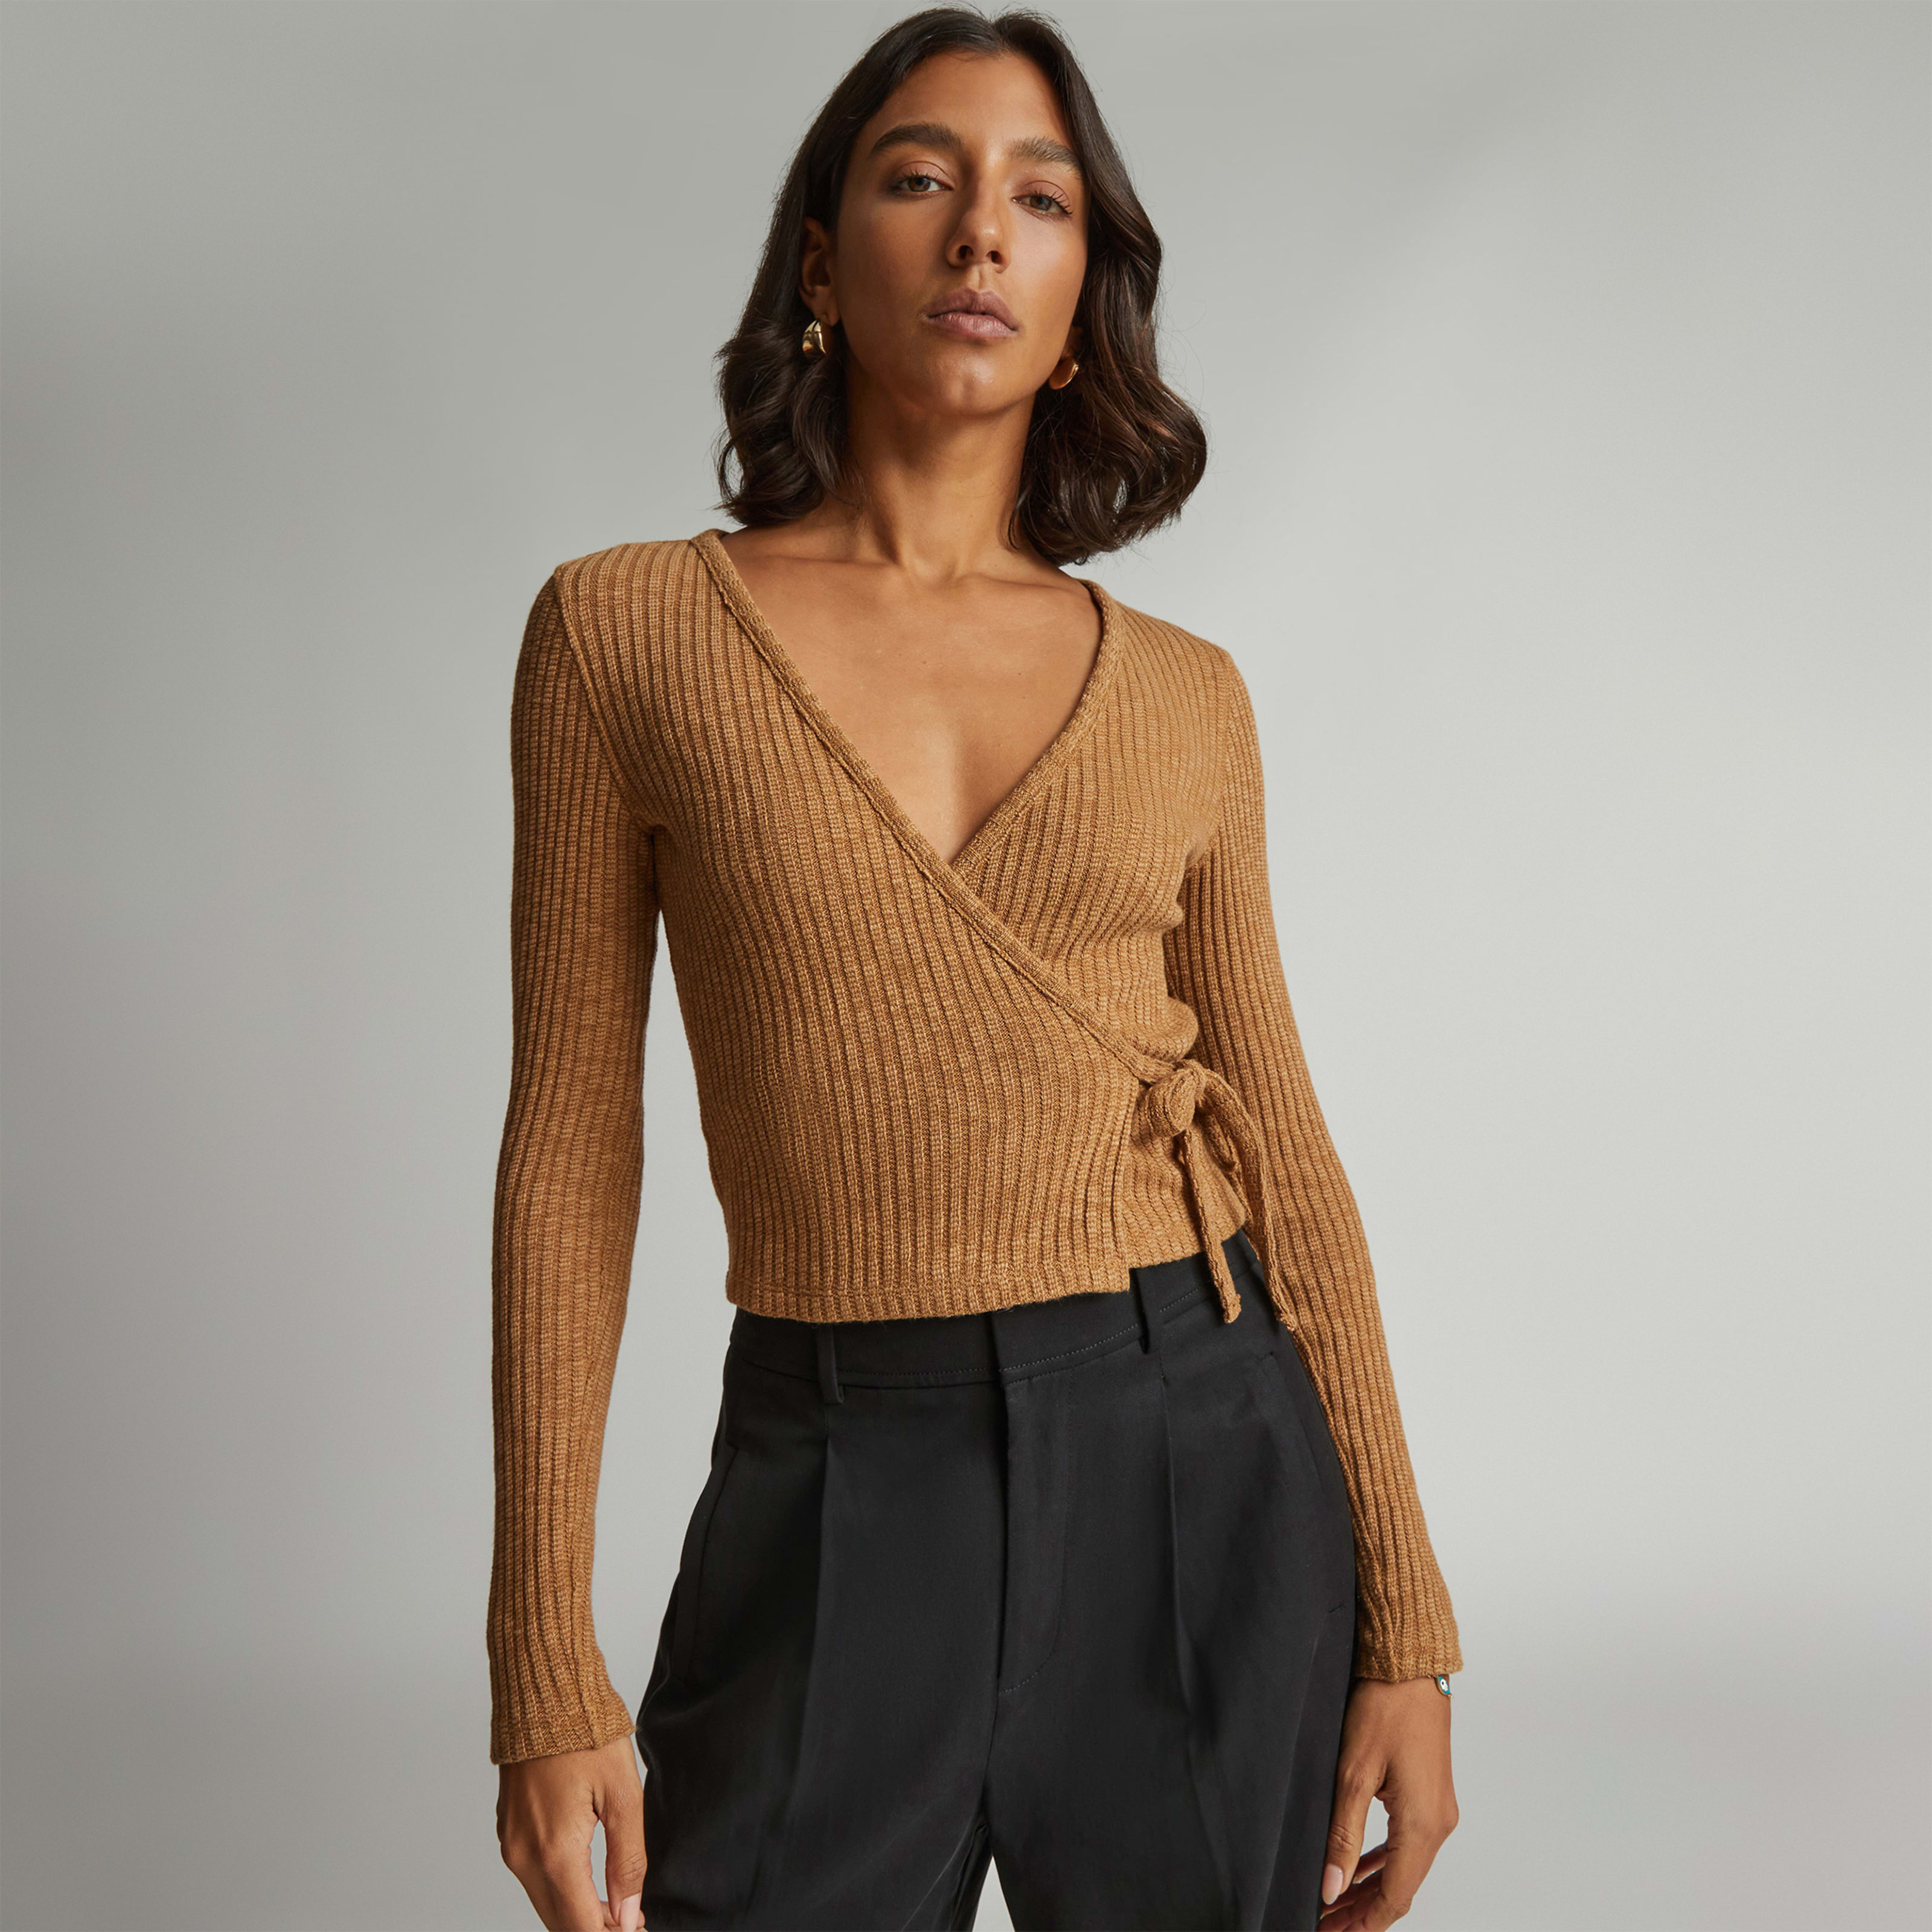 rib-knit wrap top by everlane in cappuccino, size xxs